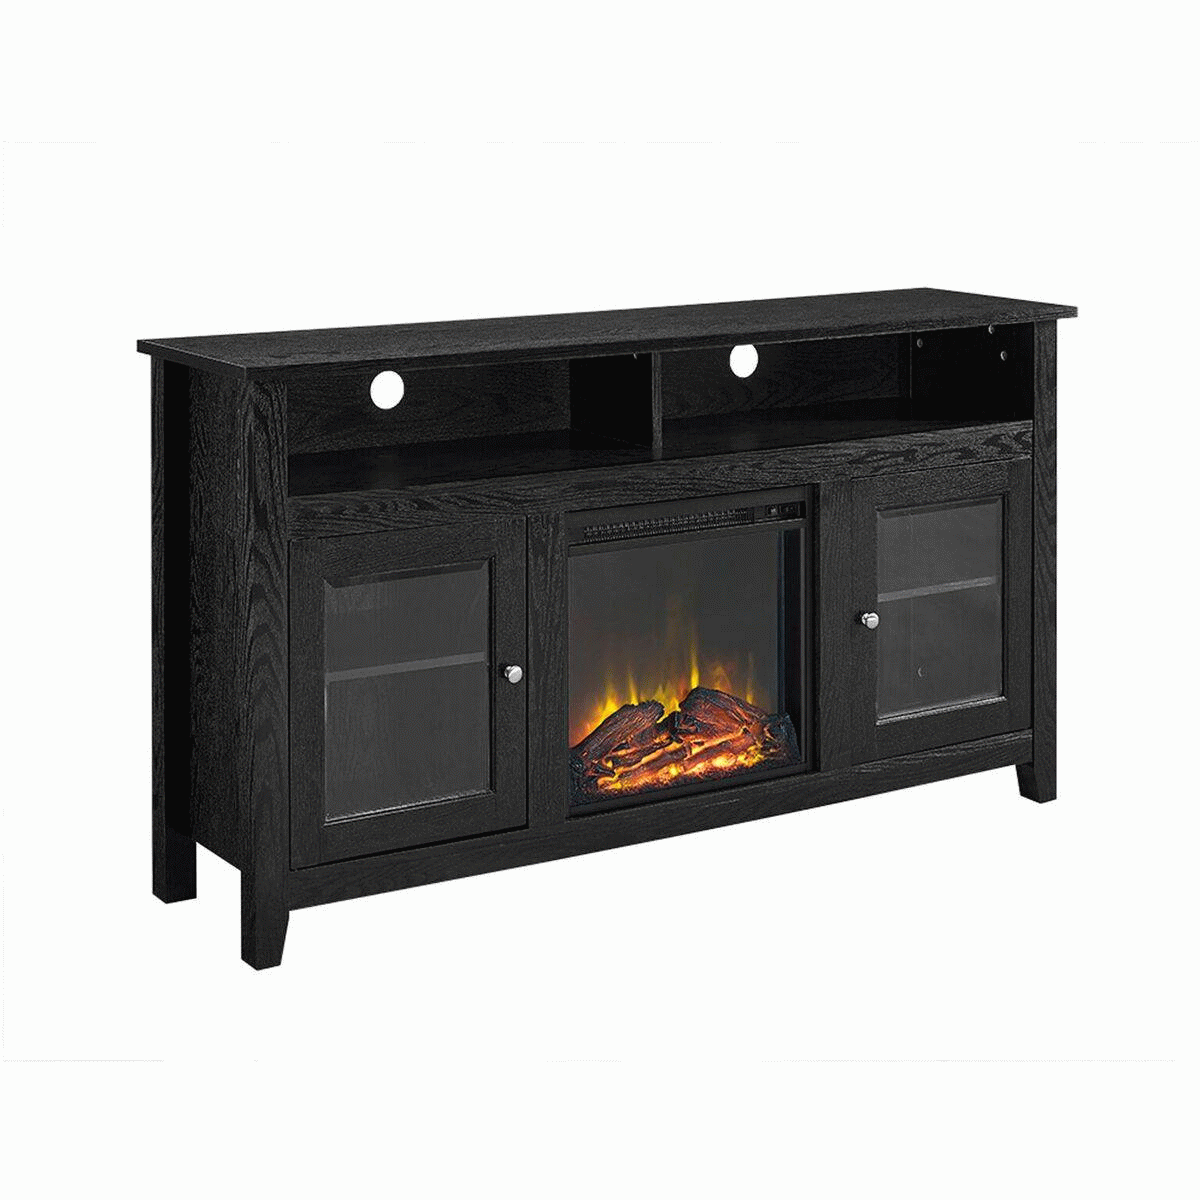 58" Wood Highboy Fireplace Tv Stand In Black – Walker Edison W58fp18hbbl With Wood Highboy Fireplace Tv Stands (Gallery 16 of 20)